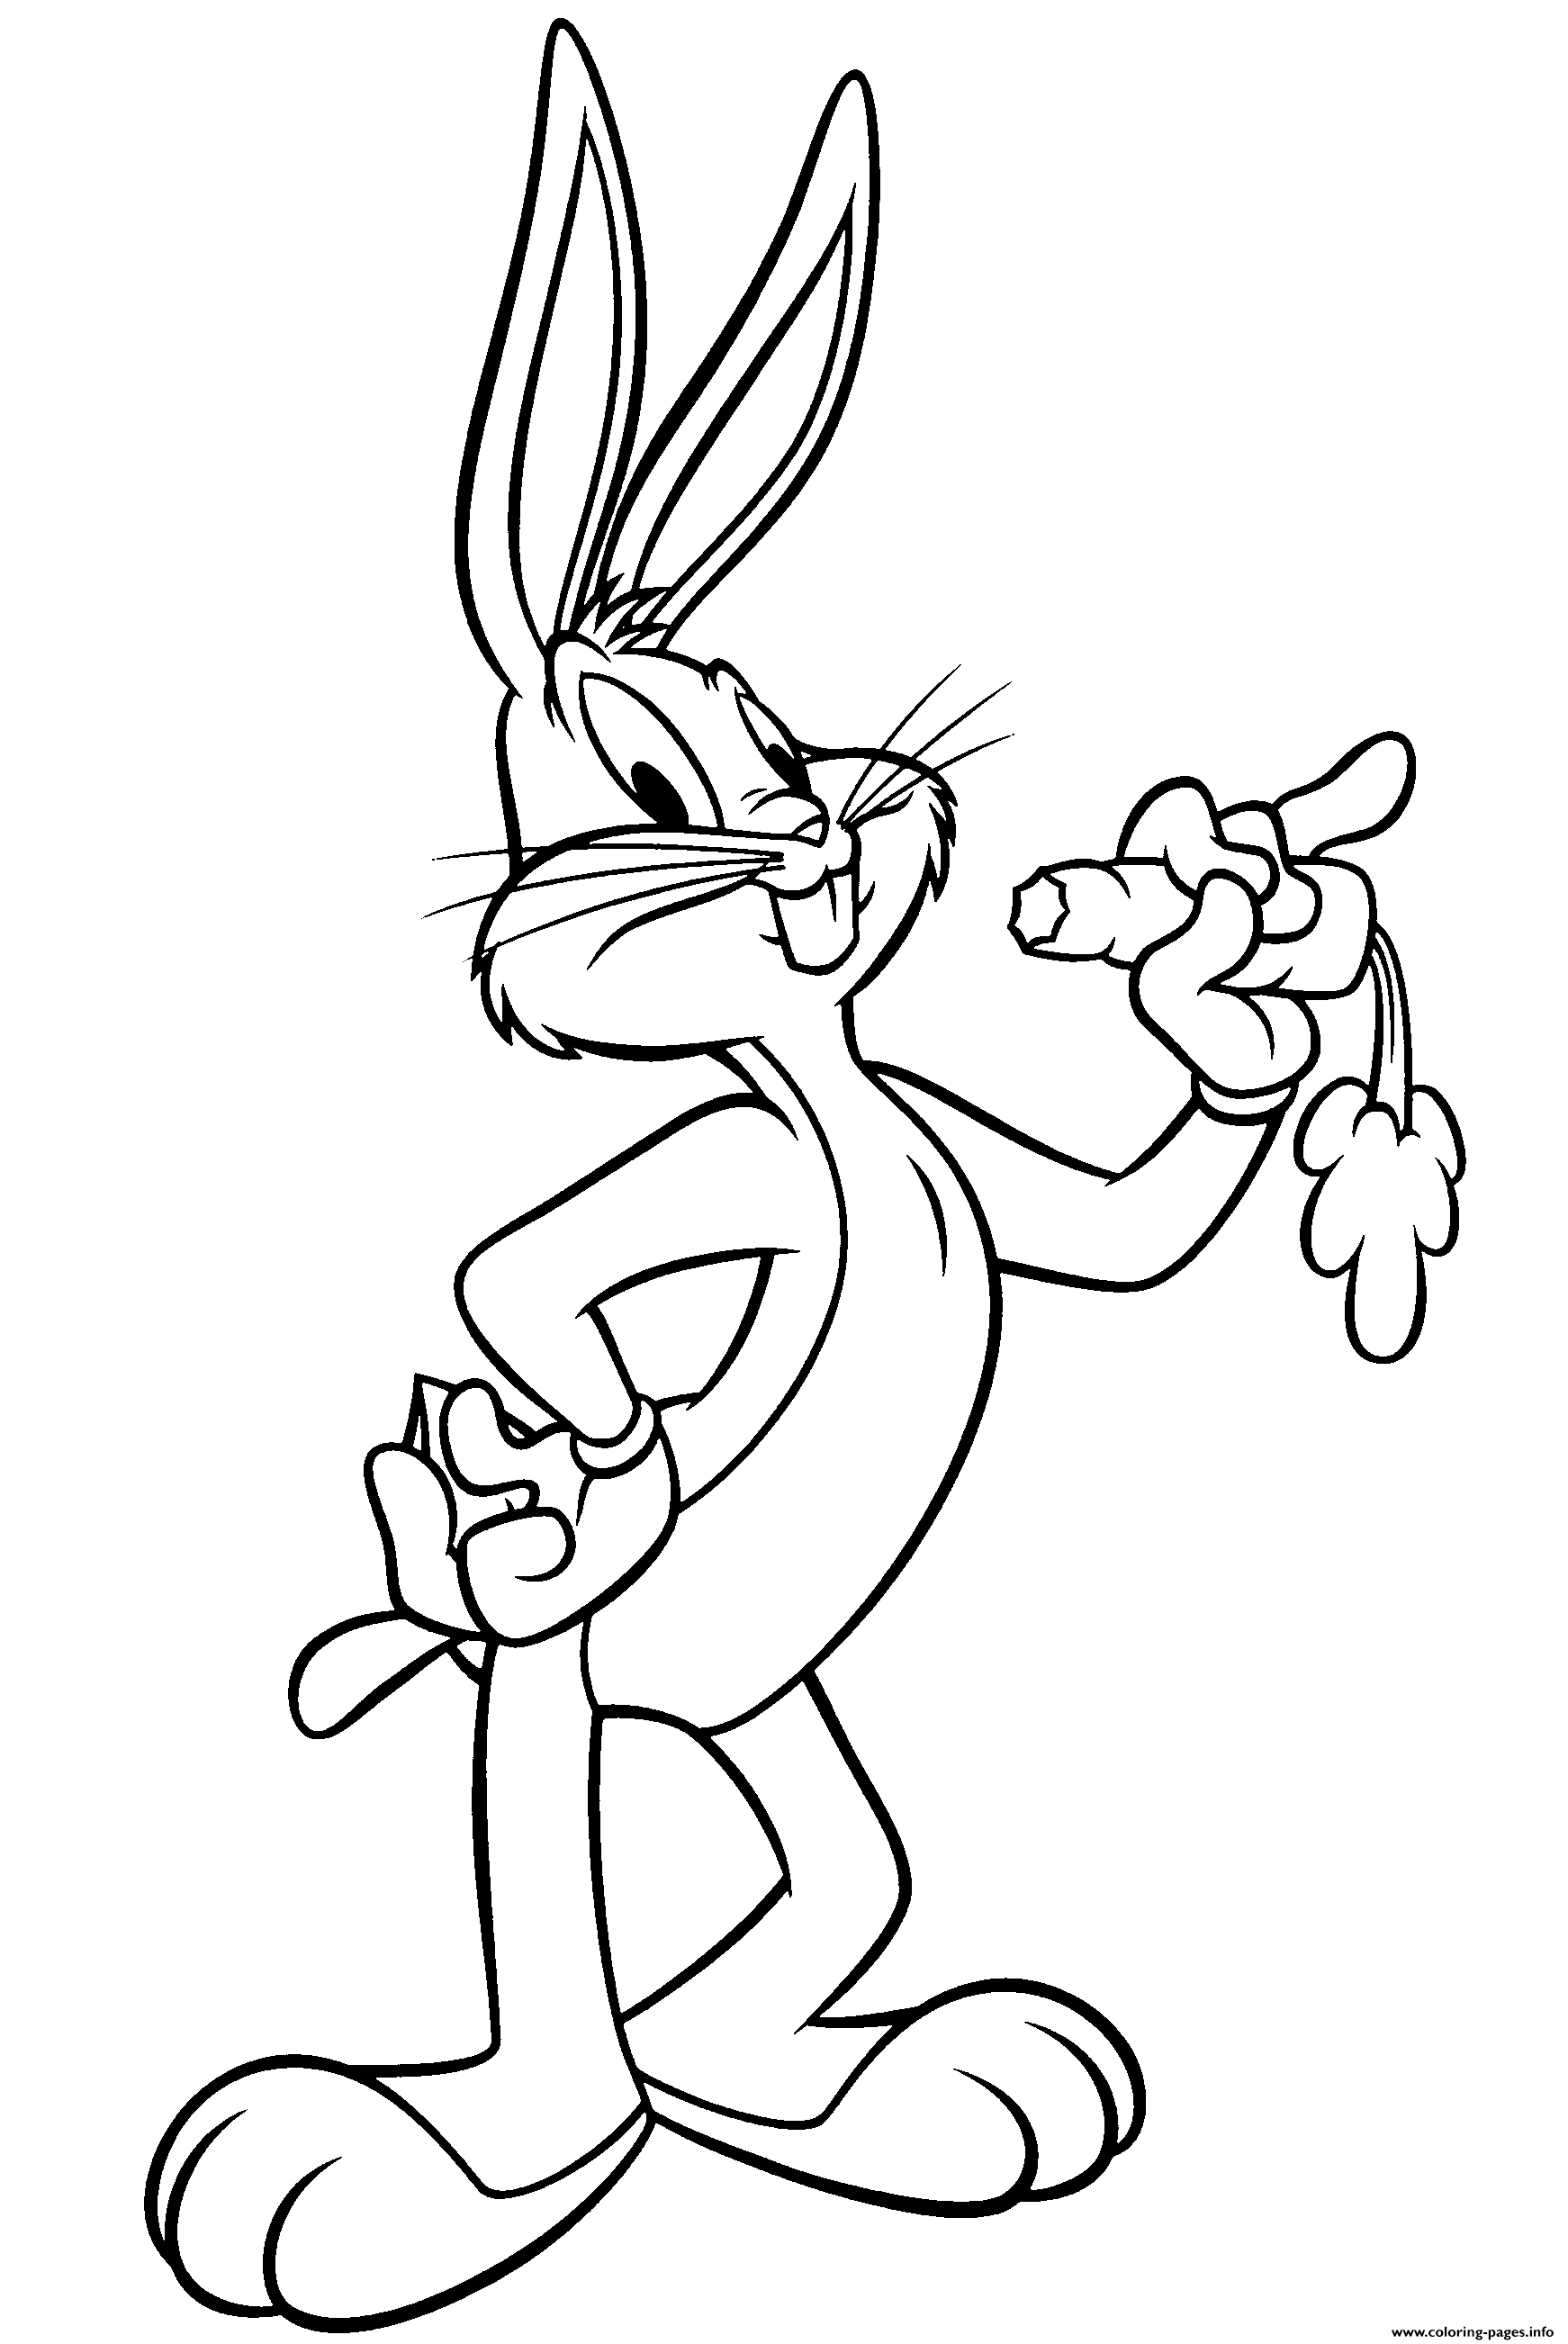 Bugs Bunny With Carrot Rabbit coloring